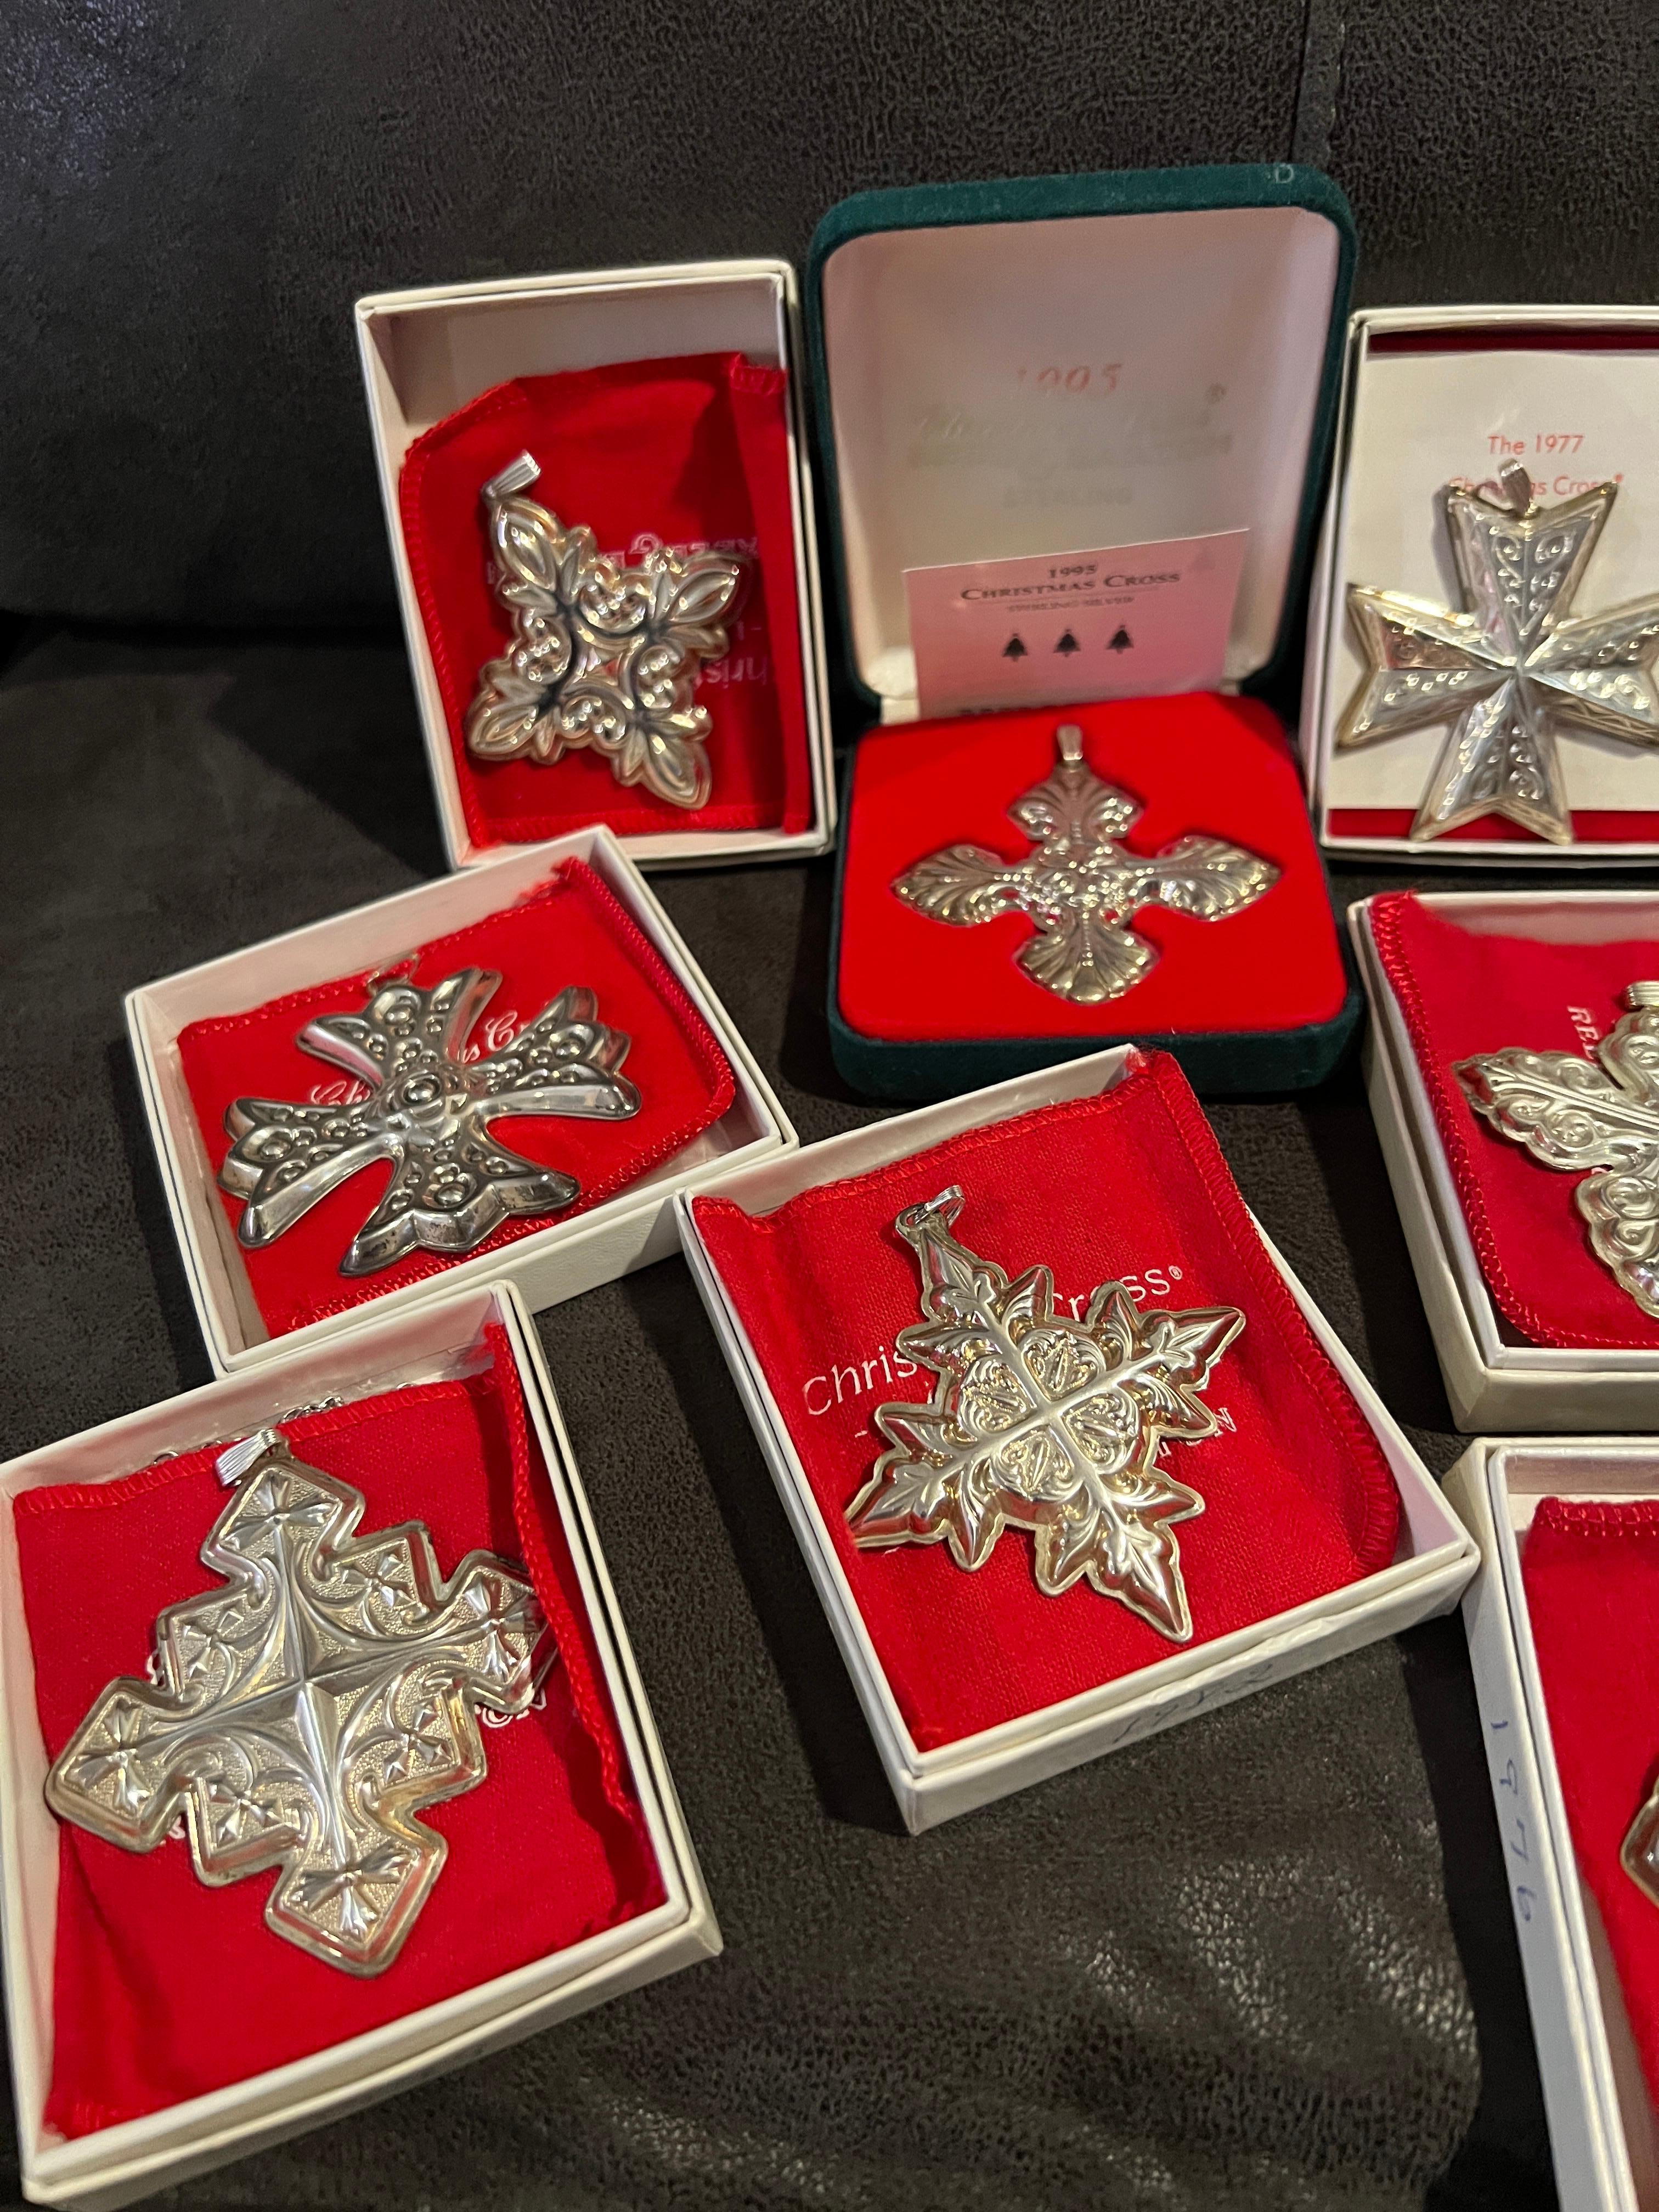 Celebrate the holiday season with this beautiful set of (19) Reed & Barton sterling silver Christmas ornaments, ranging from 1975 to 1997. Each ornament is delicately crafted and full of intricate details, making them a perfect addition to any